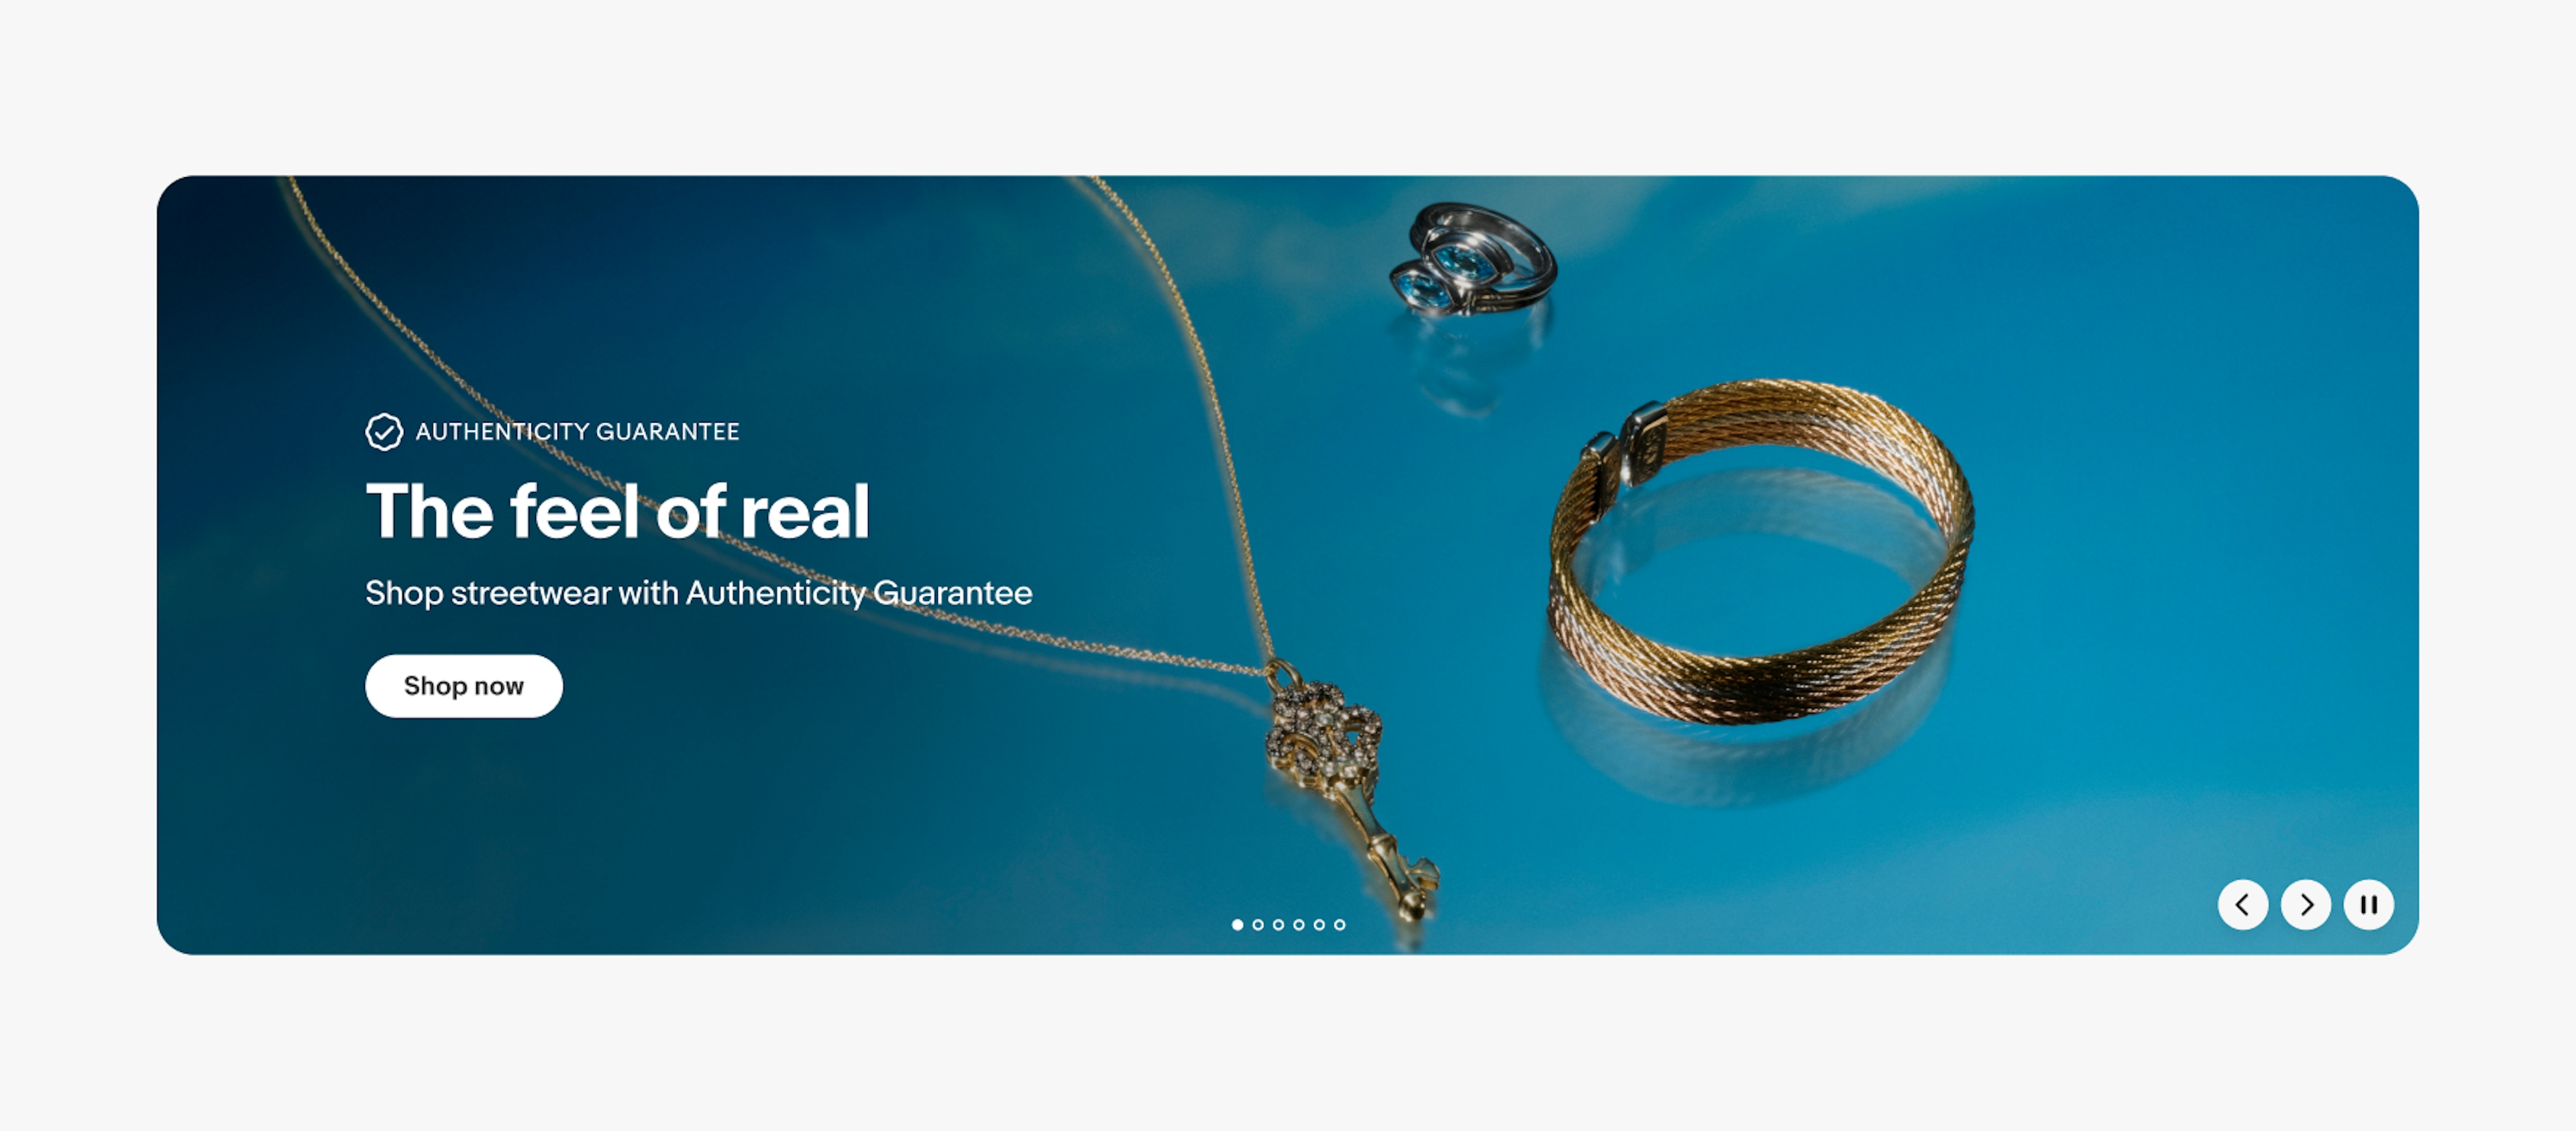 A large product banner with text on the left side containing an overline, headline, subline, and cta button. The image contains a vibrant blue background with 3 types of jewelry. The overline has the program lockup for Authenticity Guarantee.